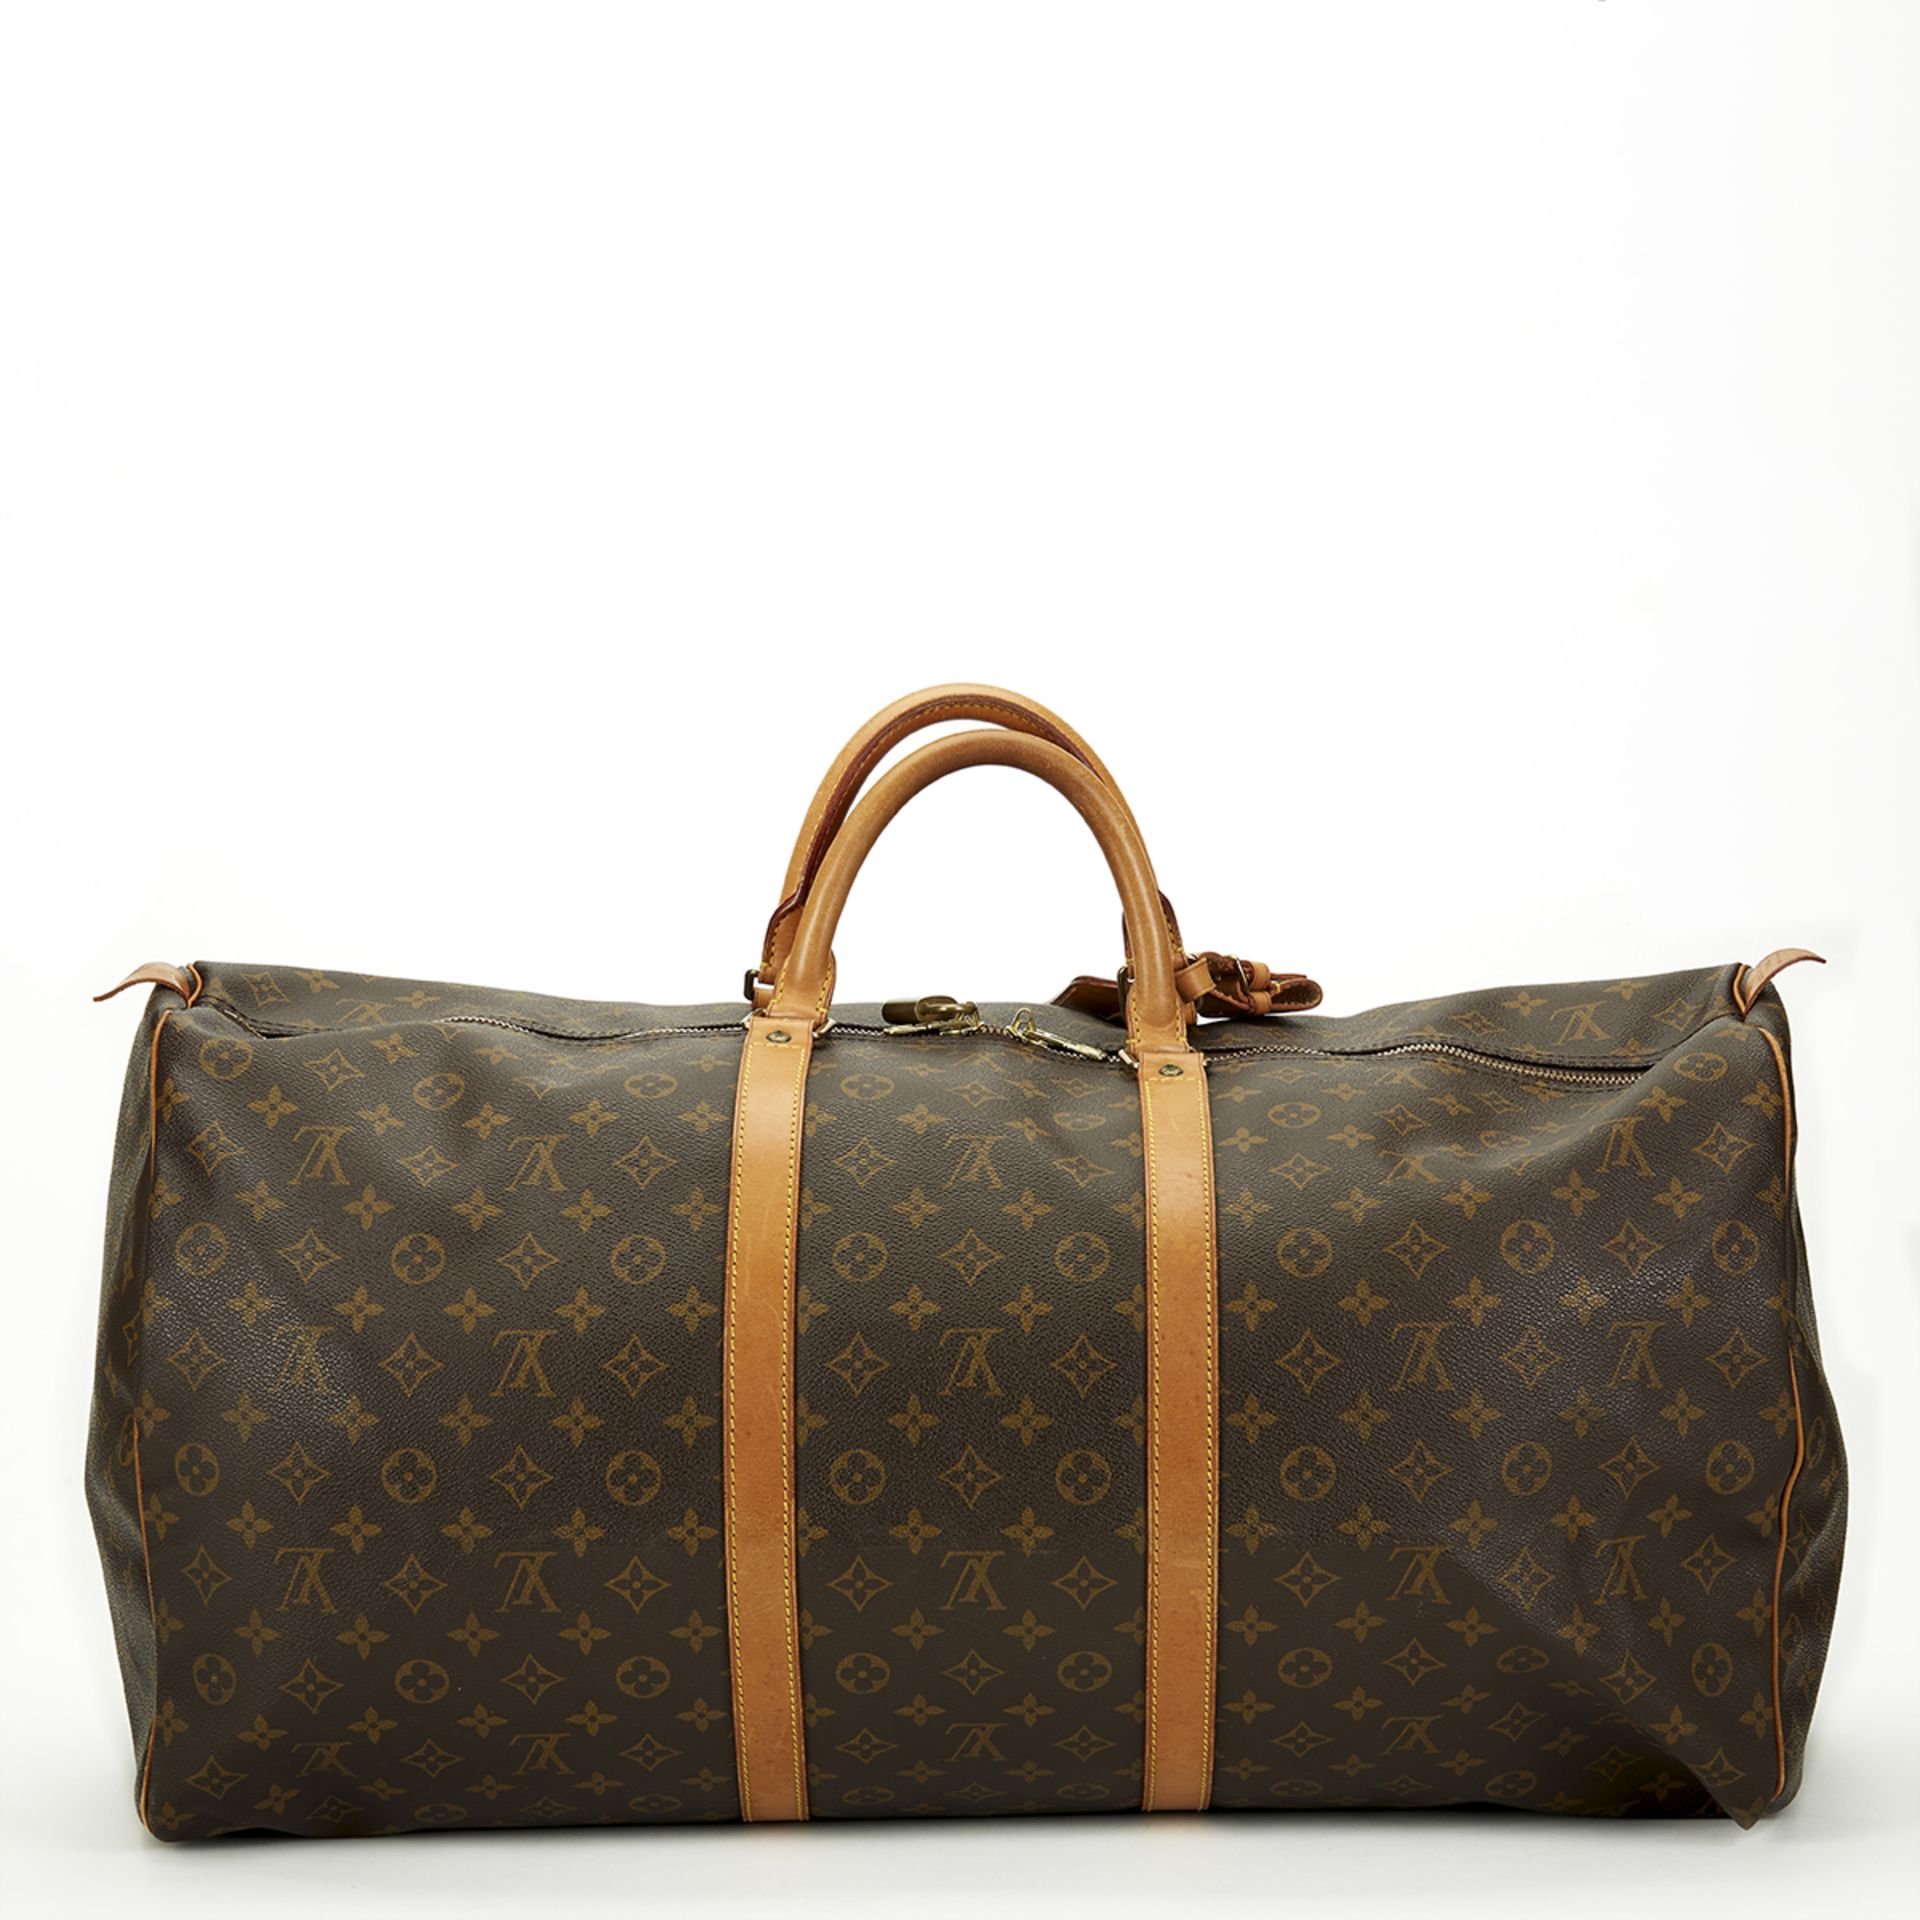 Louis Vuitton, Keepall 60 - Image 4 of 6